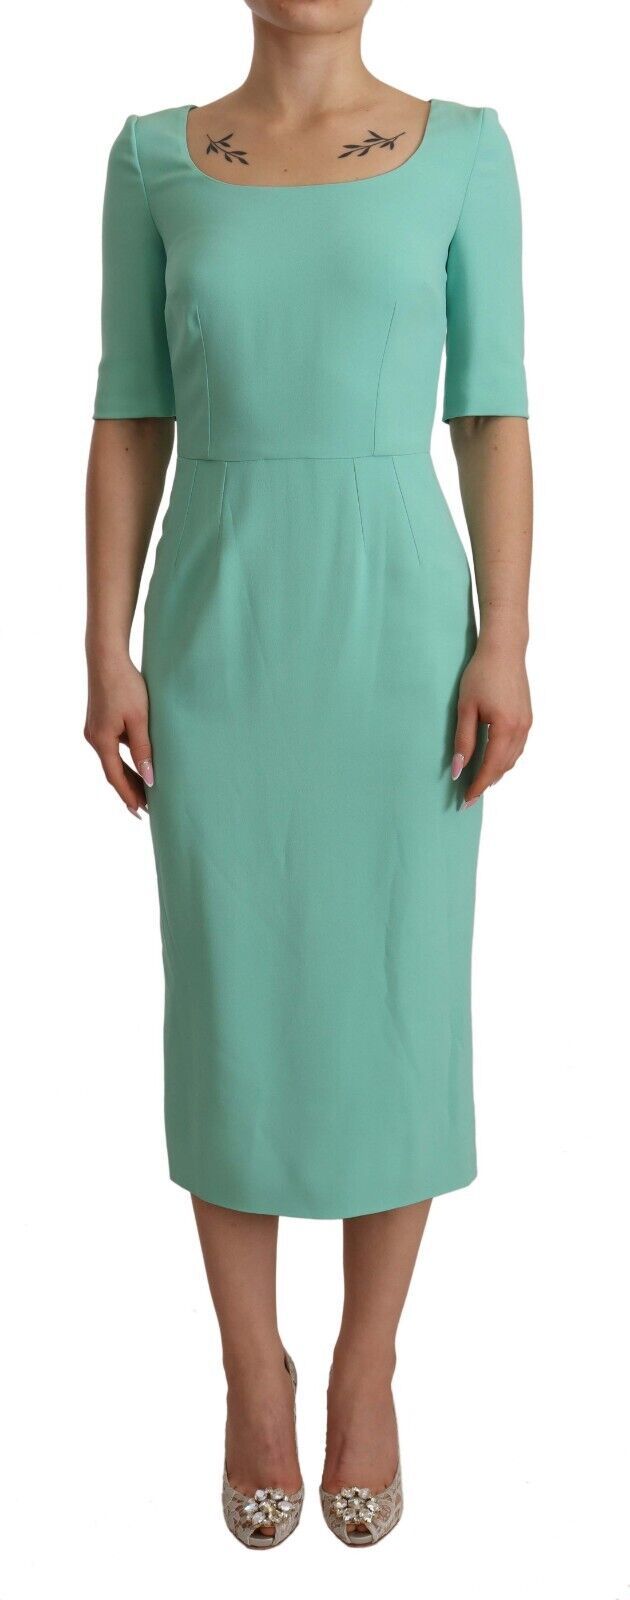 Mint Green Sheath Dress with Square Neck